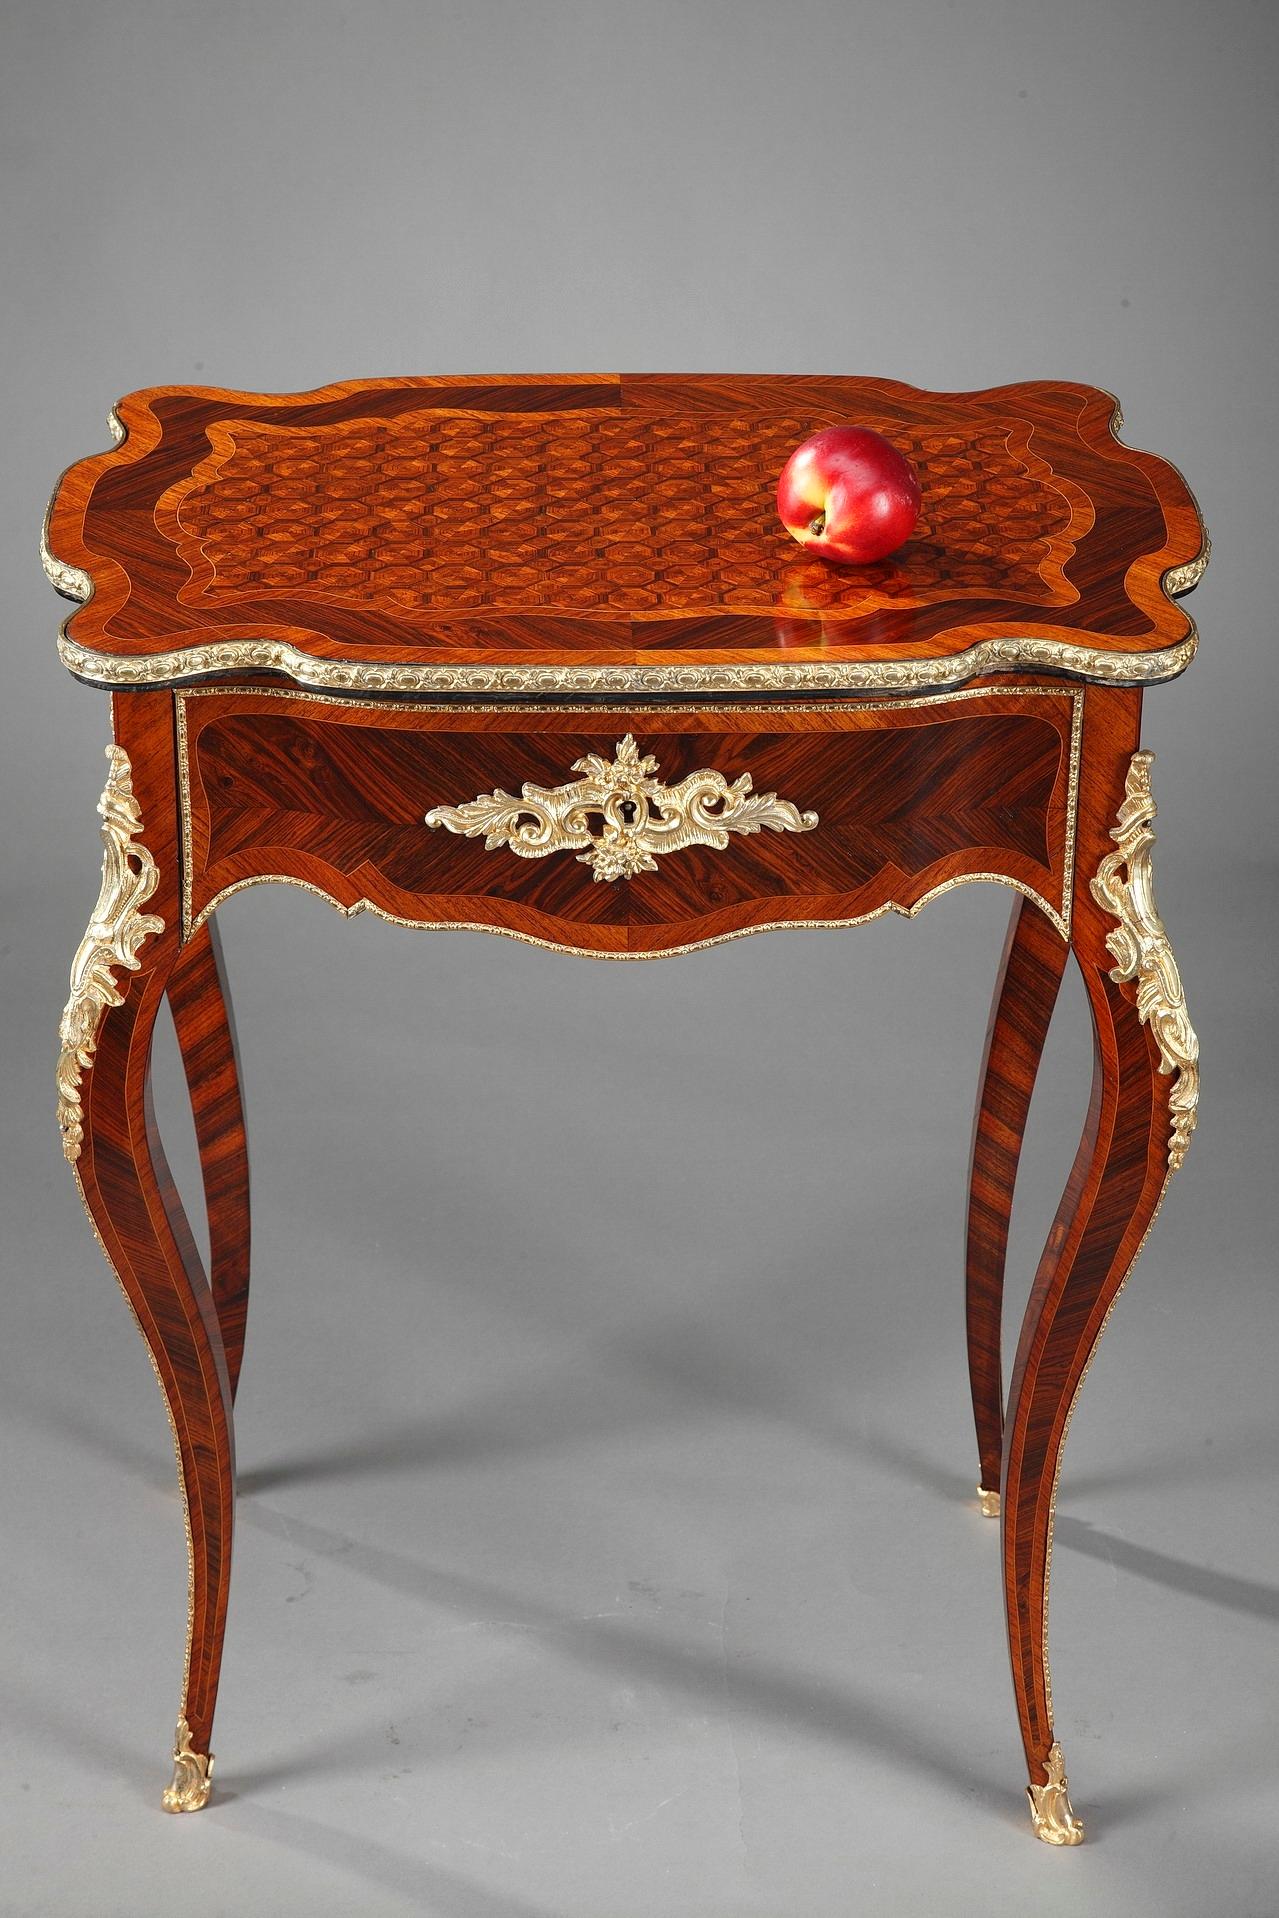 Napoleon III antique dressing table in exotic wood veneers, with flowing lines accented by fine cast bronze ormolu decoration of ova, rinceau and scrolls. The tabletop adorned with wood marquetry opens up over a storage compartment and a drawer